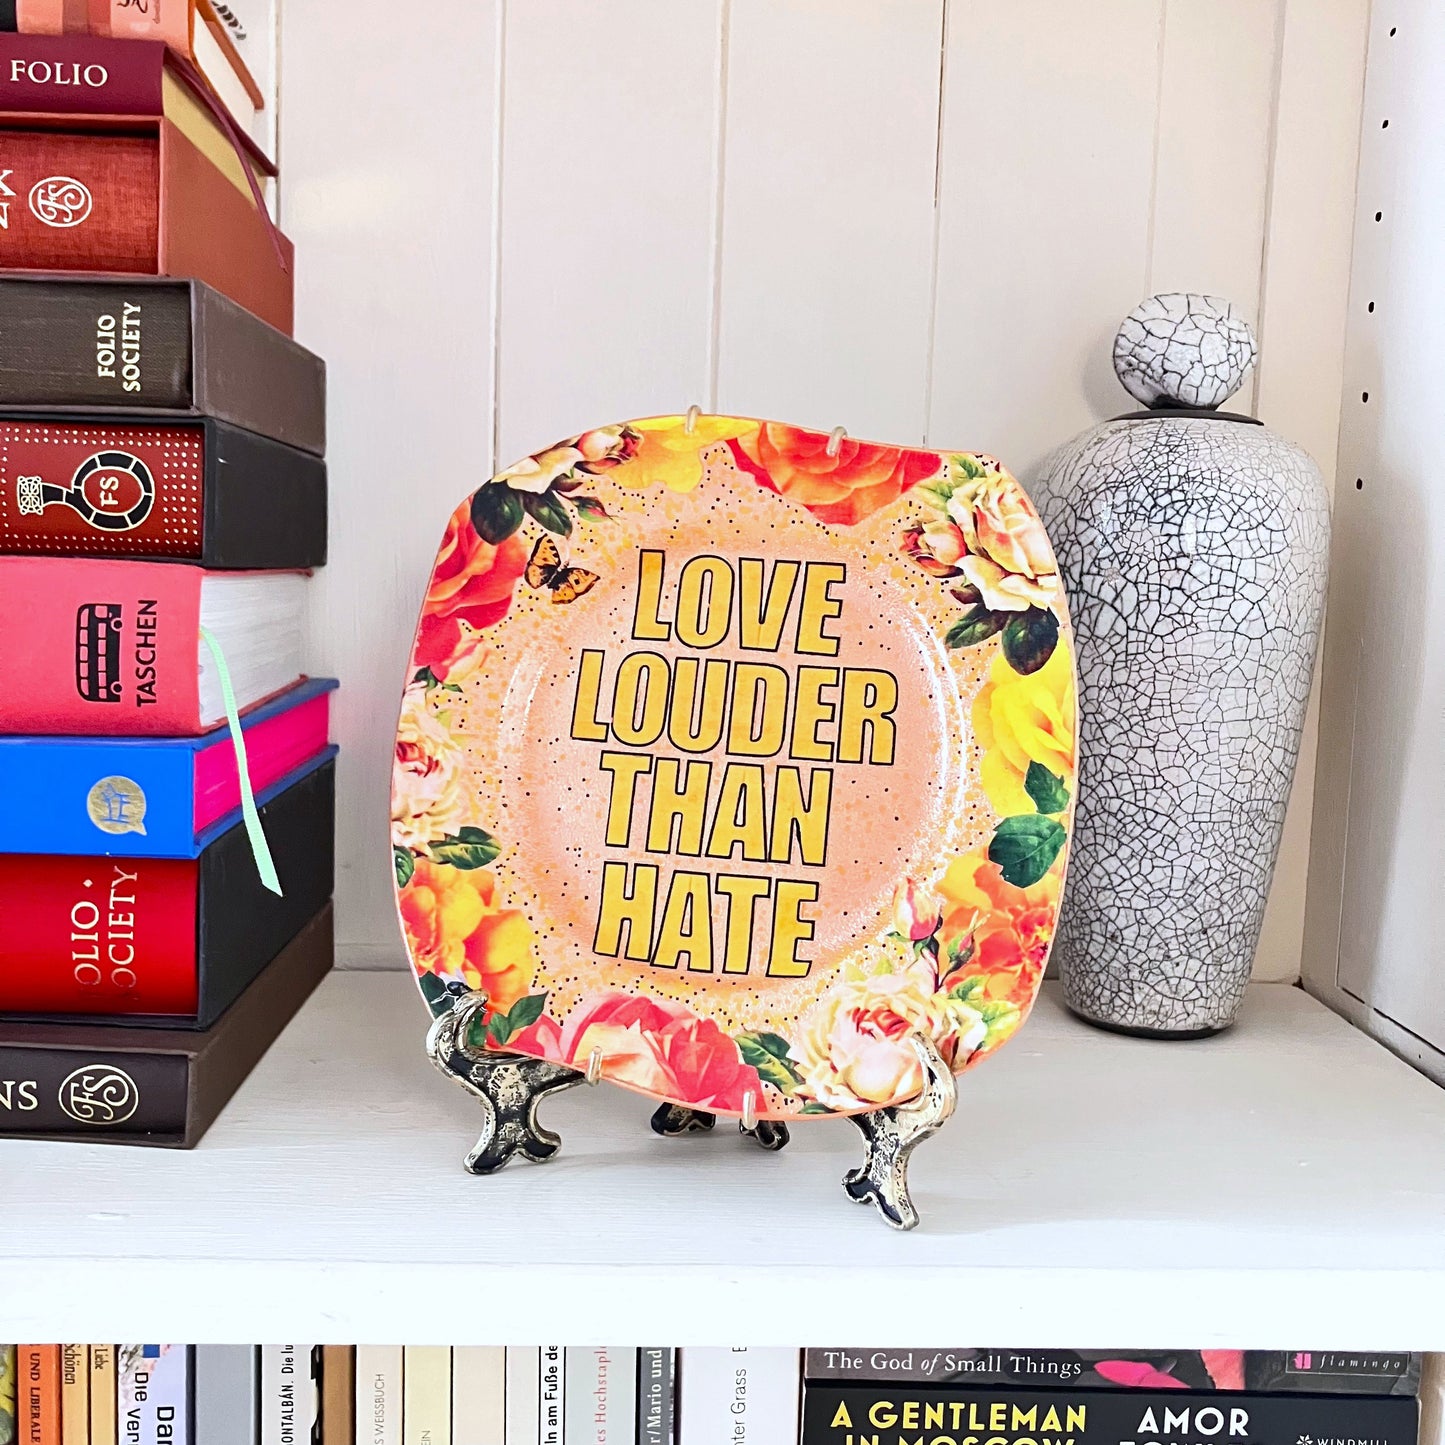 "Love Louder Than Hate" Upcycled Wall Plate by House of Frisson, featuring a collage of the words "love louder than hate" set against a peach background and framed by roses. Plate on a plate stand resting on a shelf.